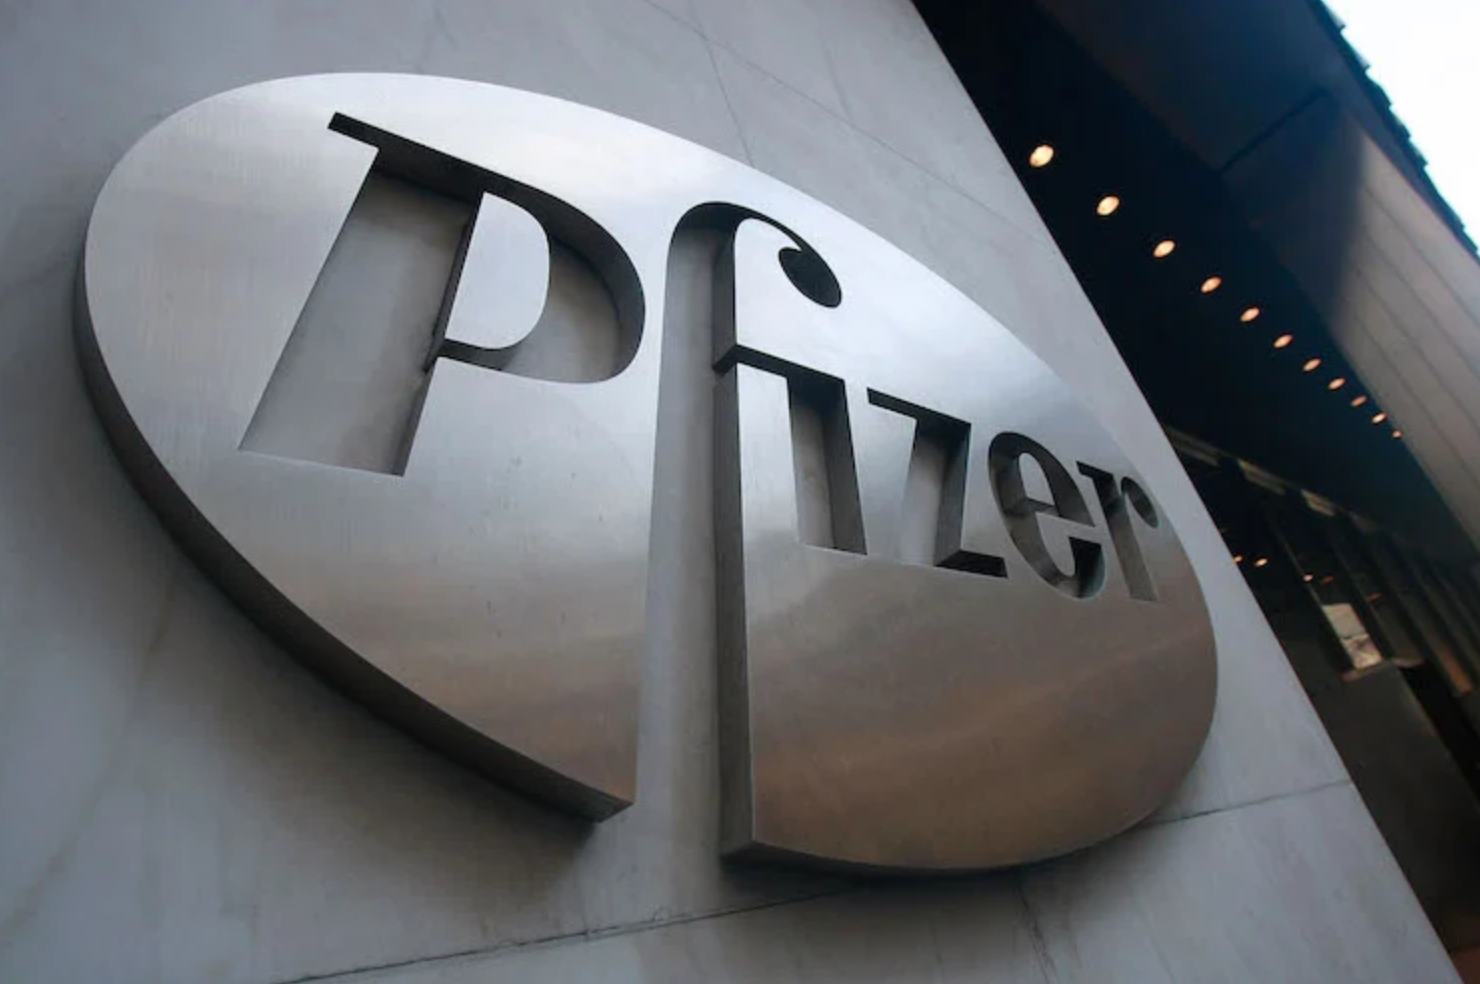 Peter Doshi: Pfizer and Moderna vaccines “95% effective” - we need more details and raw data.